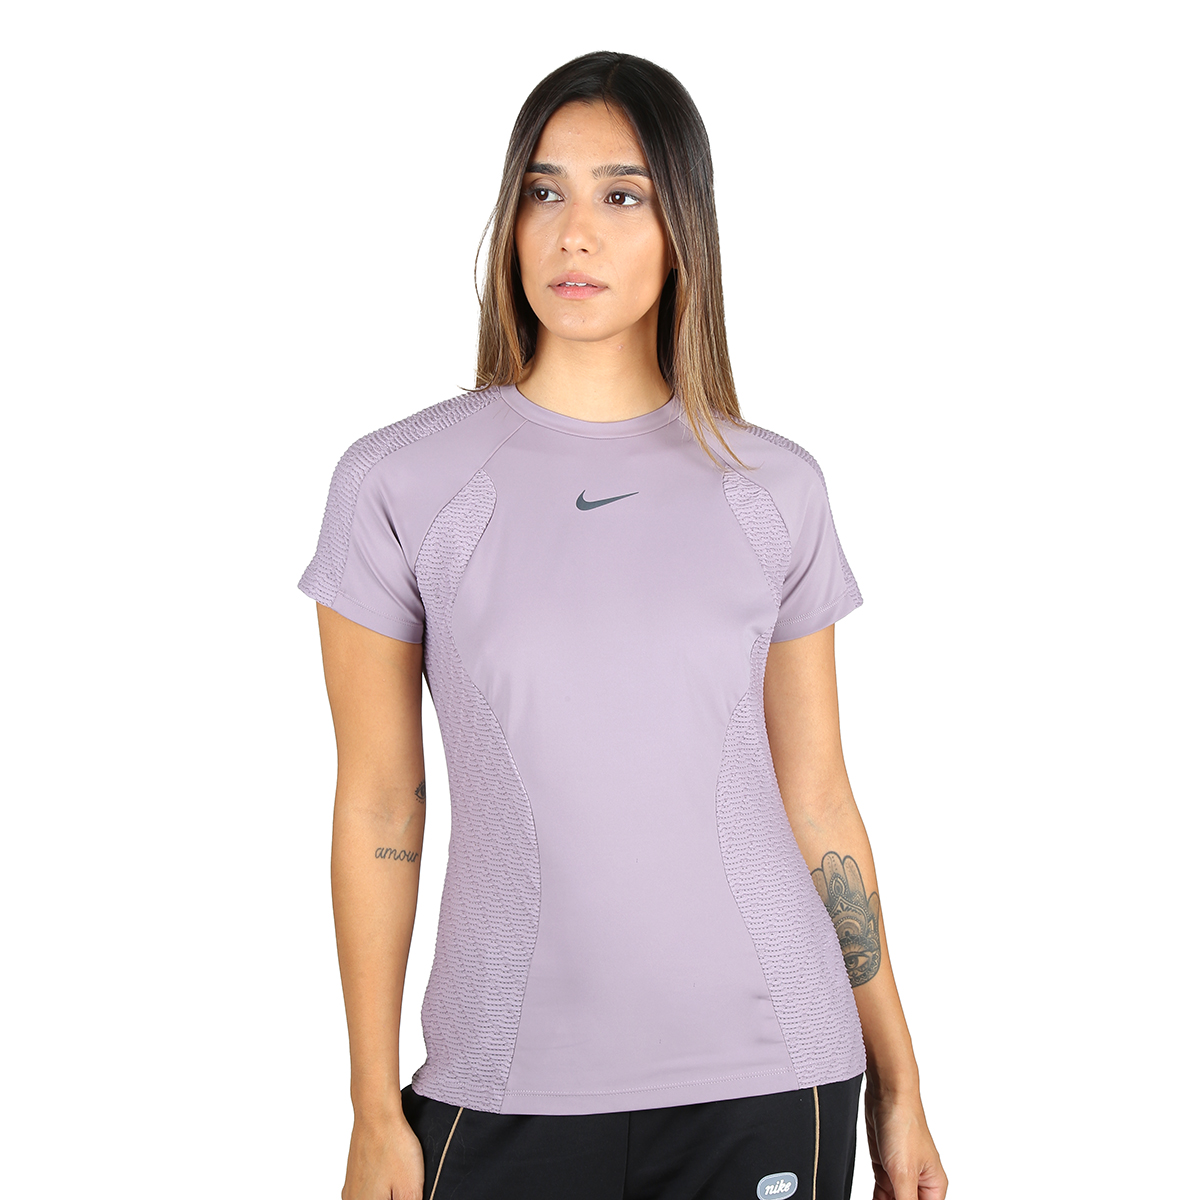 Remera Running Nike Run Division Dr-Fit Adv Mujer,  image number null